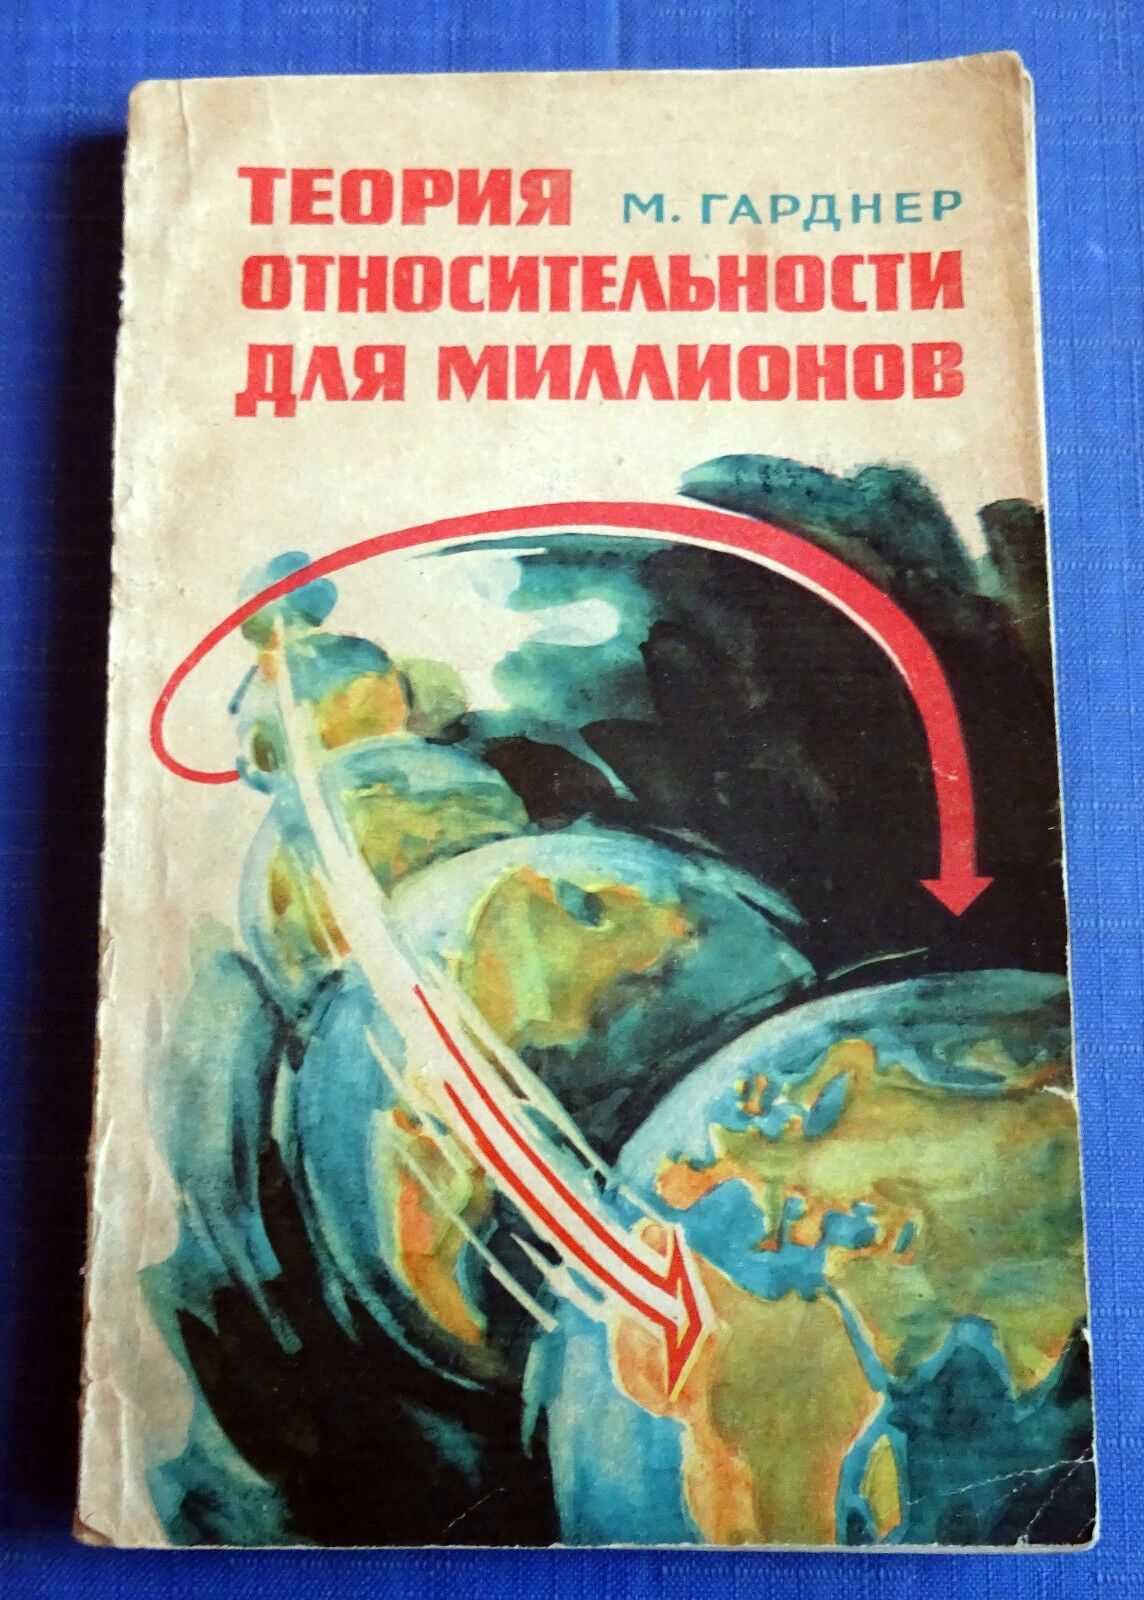 1965 Theory of relativity for millions Gardner Physics Einstein Russian book